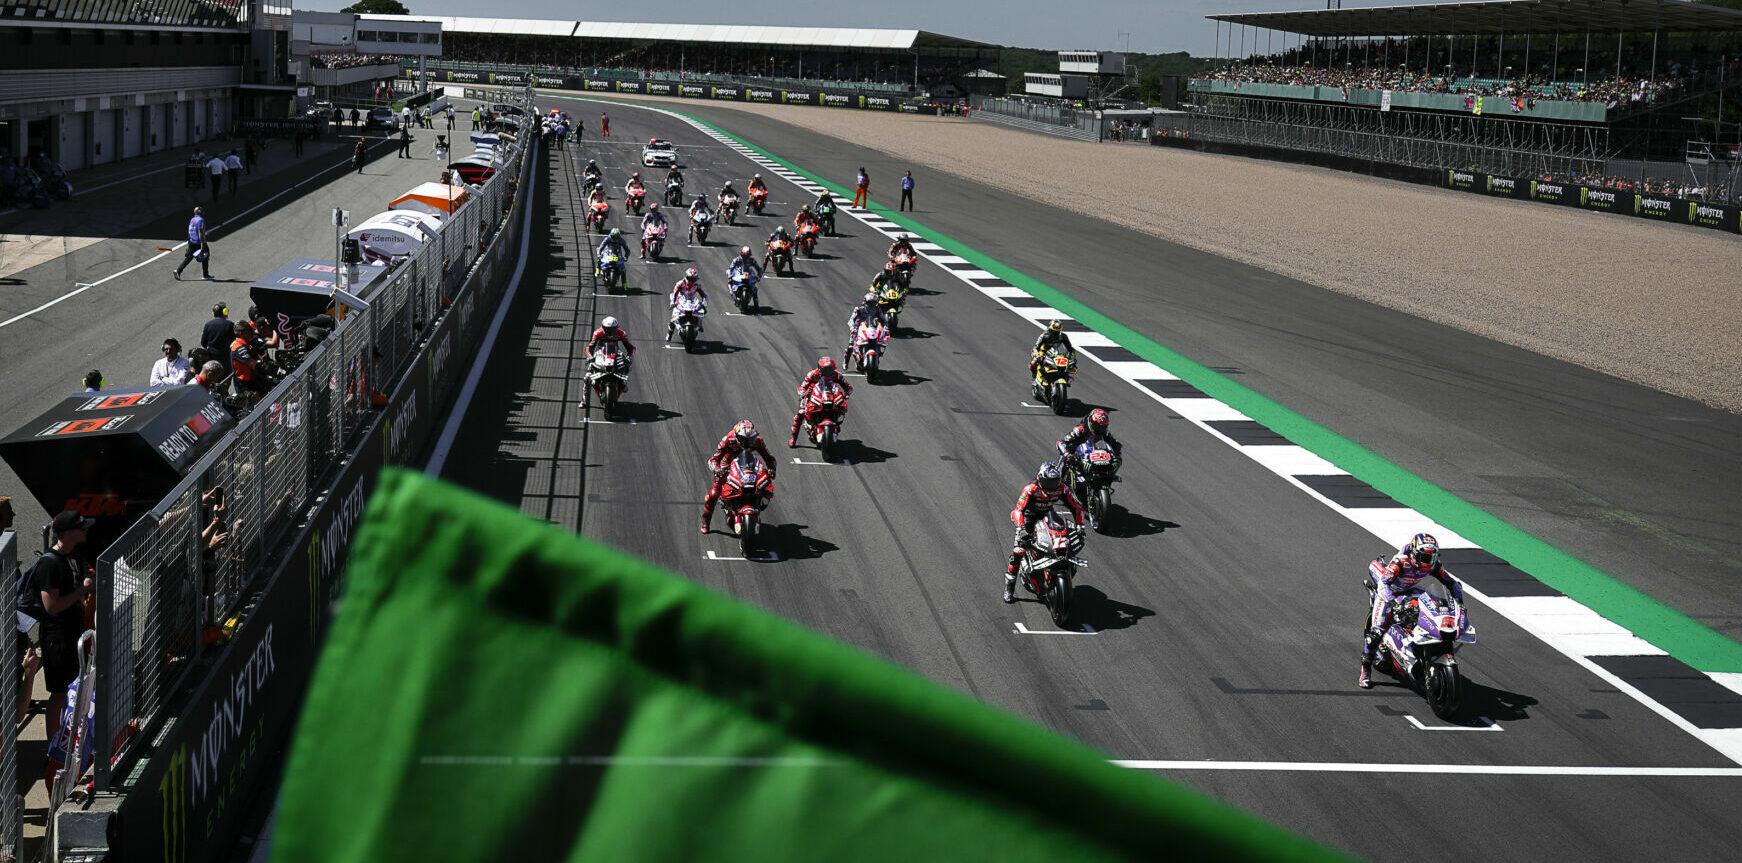 The grid prior to the start of the MotoGP race at Silverstone in 2022. Photo courtesy Dorna.